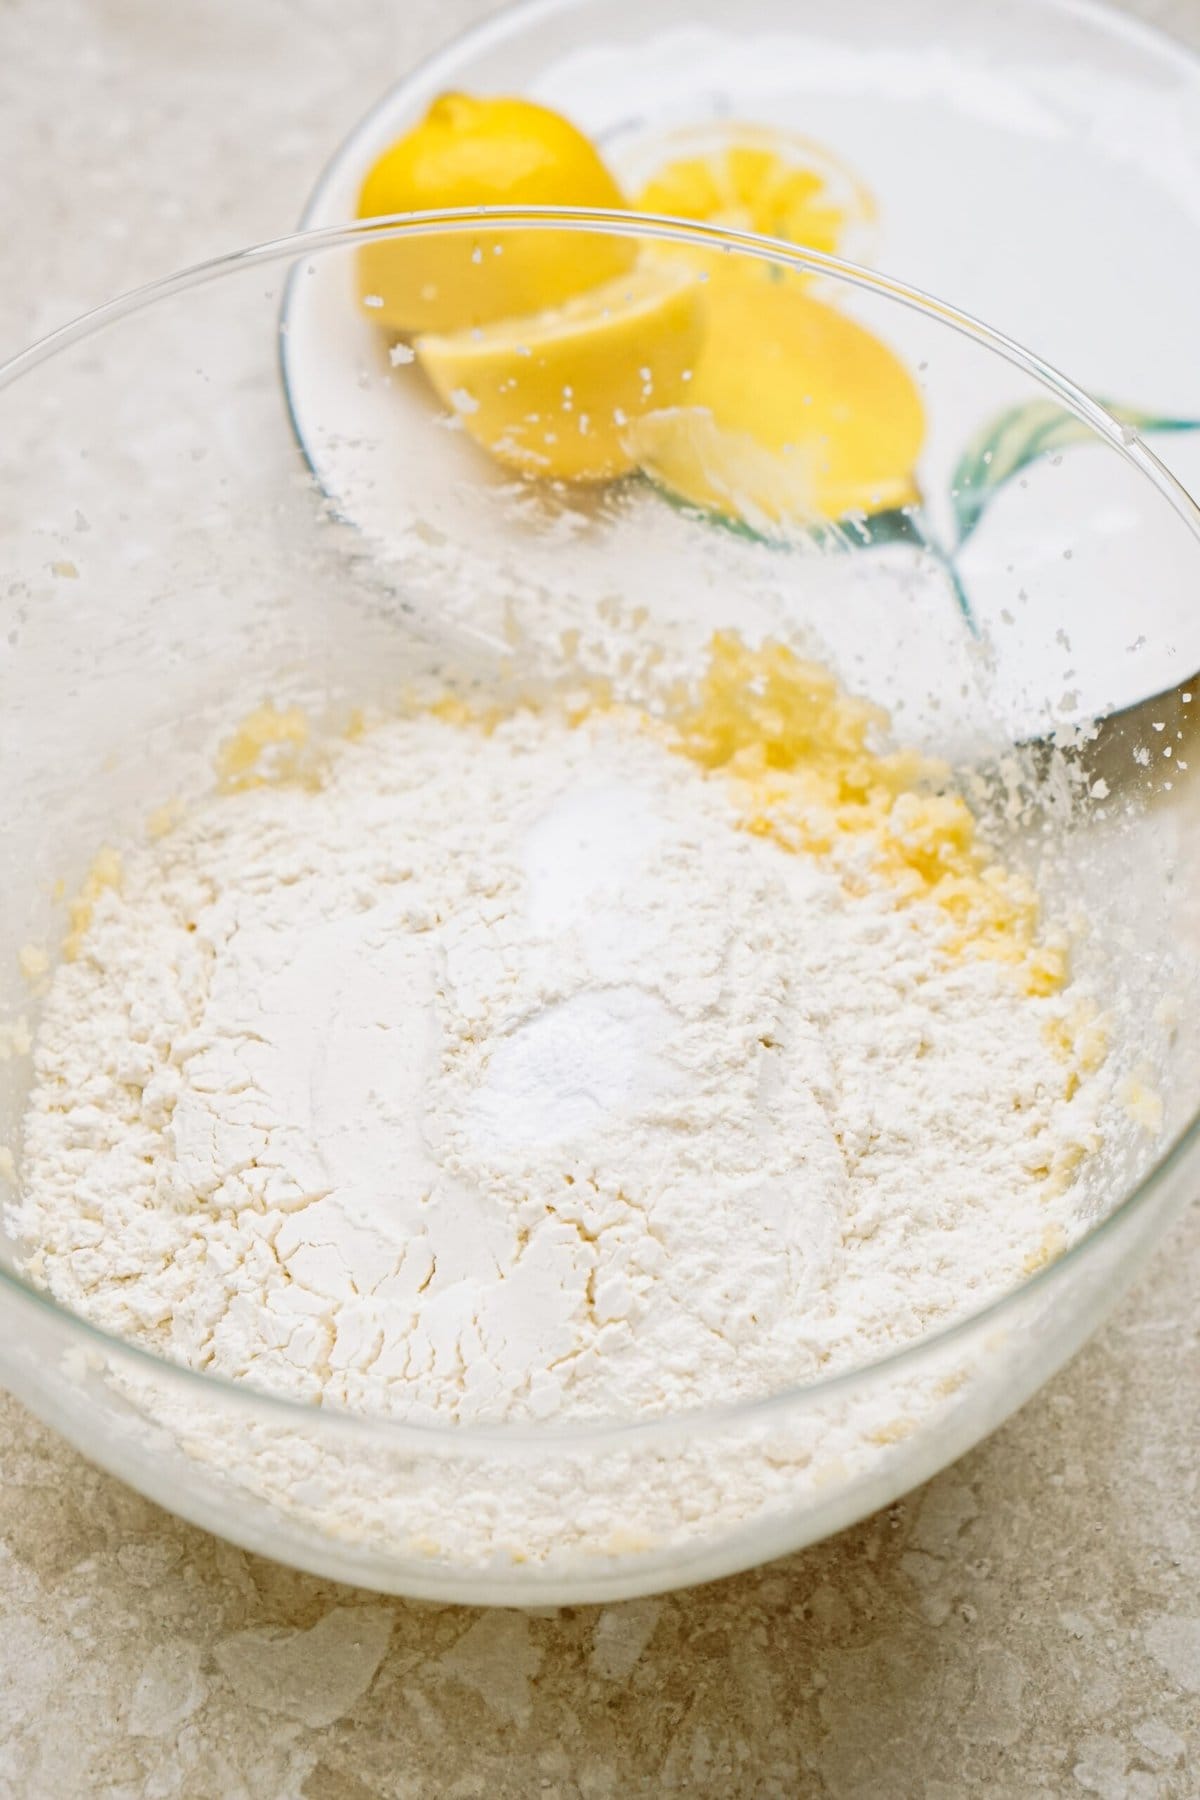 Baking ingredients with flour and eggs in a glass mixing bowl.